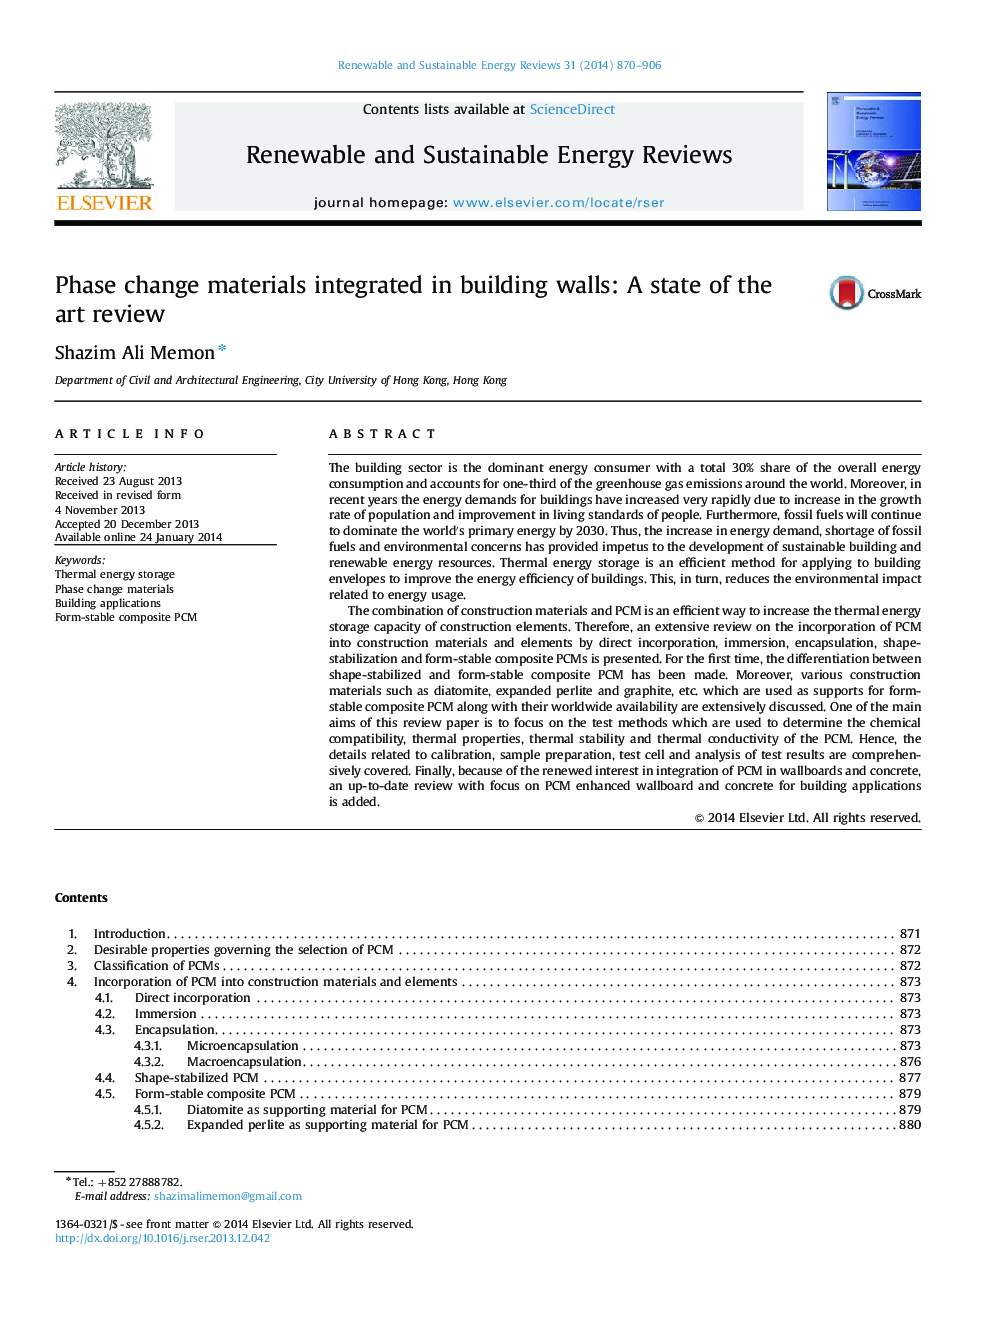 Phase change materials integrated in building walls: A state of the art review